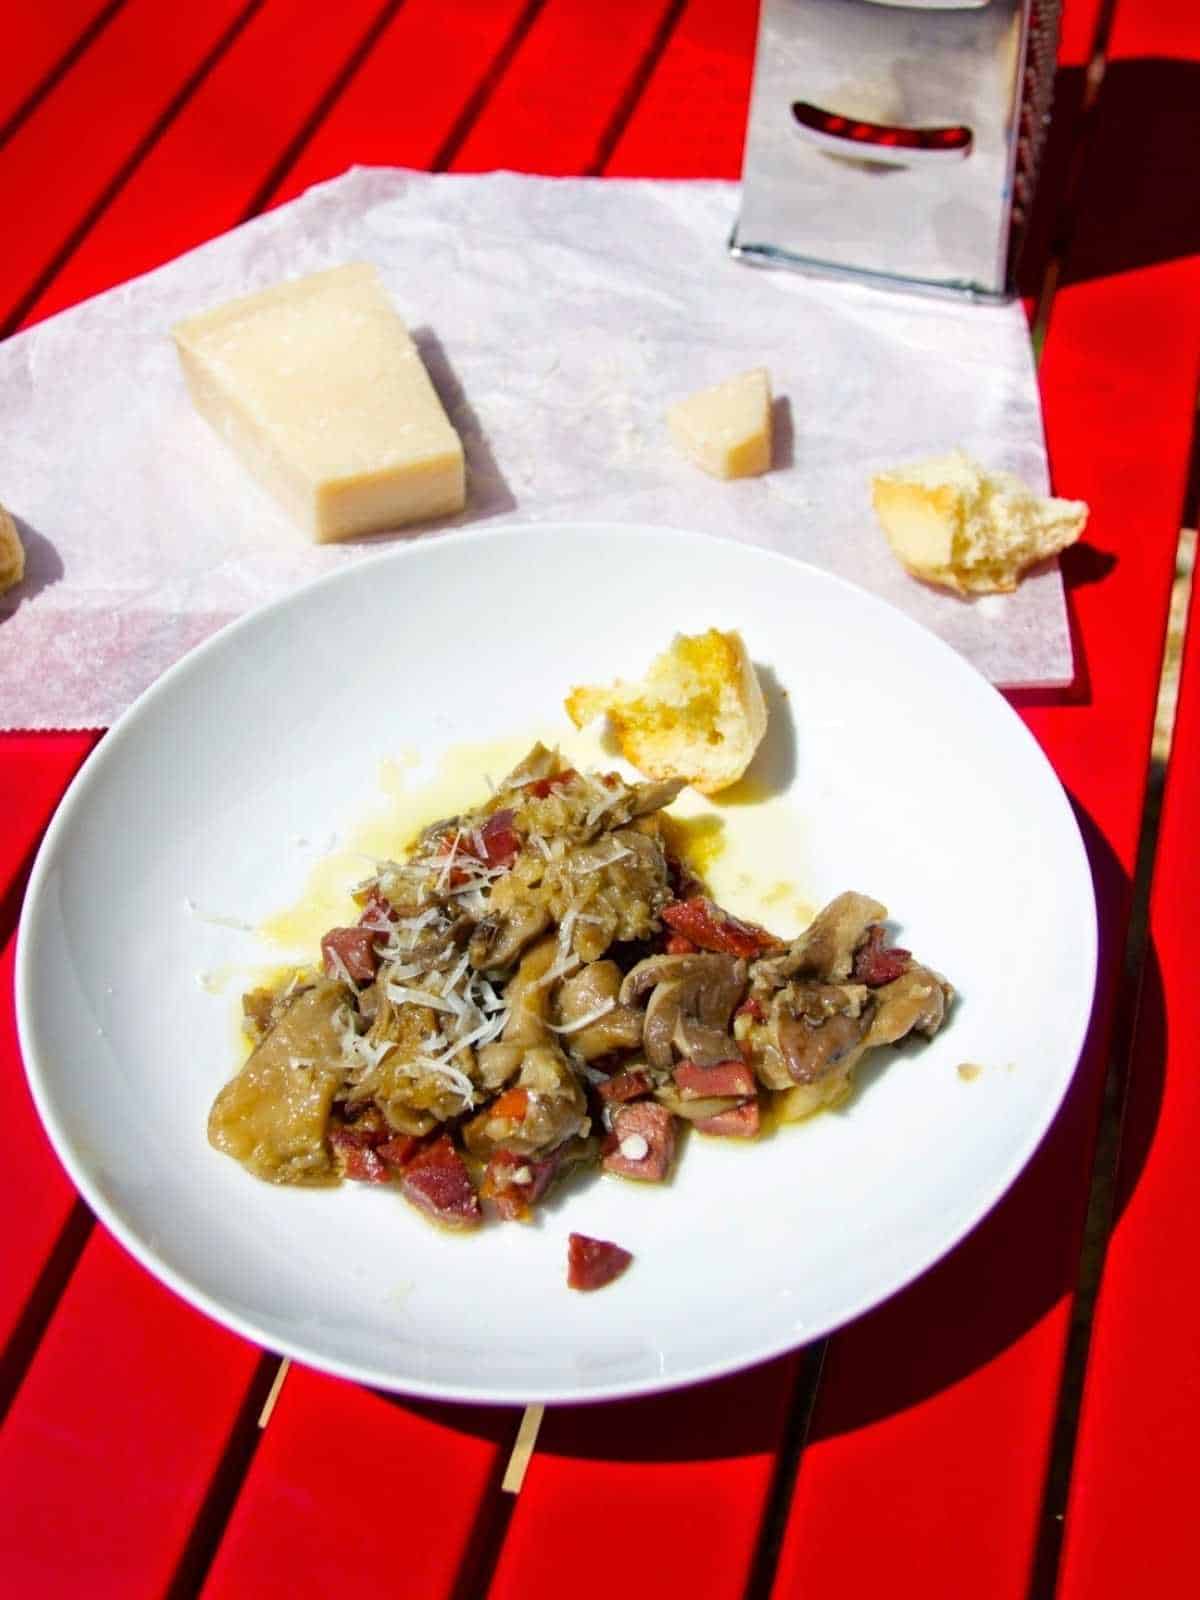 Thermomix Spanish Mushrooms with serrano ham, setasl al ajillo, served on a white plate against a red slatted surface. There is a metallic cheese grater at the top of the photo and a wedge of parmesan cheese resting on wax paper with some crusty bread